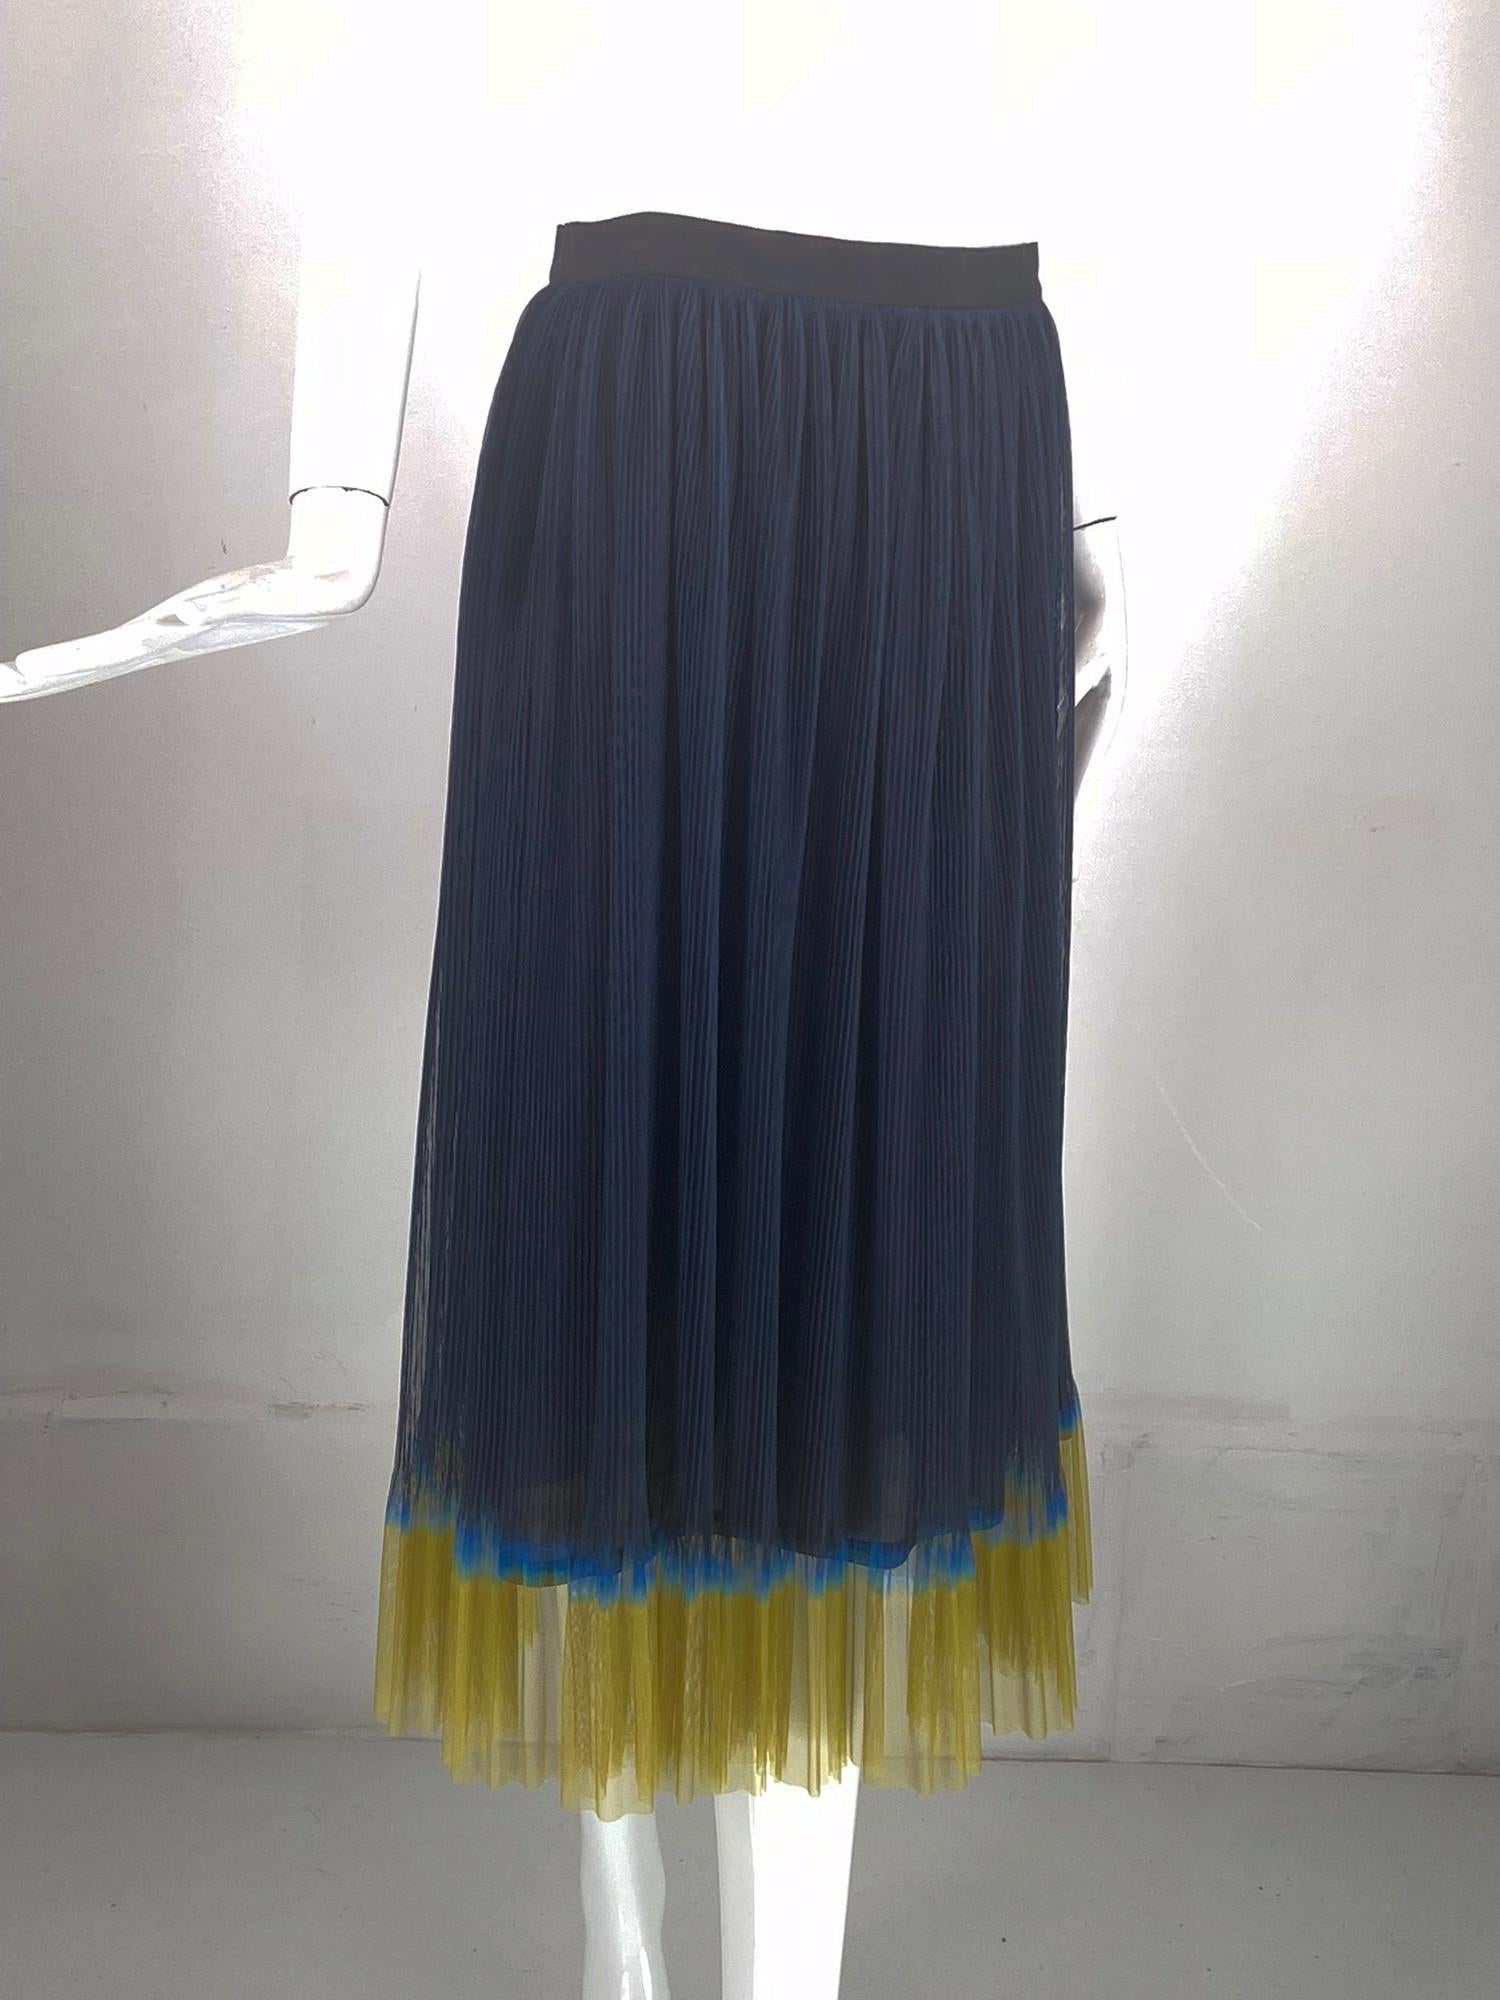 Dries Van Noten navy pinch pleated ombre hem mesh skirt. Black grosgrain waist band skirt of navy mesh that is pinch pleated the lower hem is ombre dyed in shades of blue and mustard yellow. Lined in navy silk. Closes at the back with a zipper and